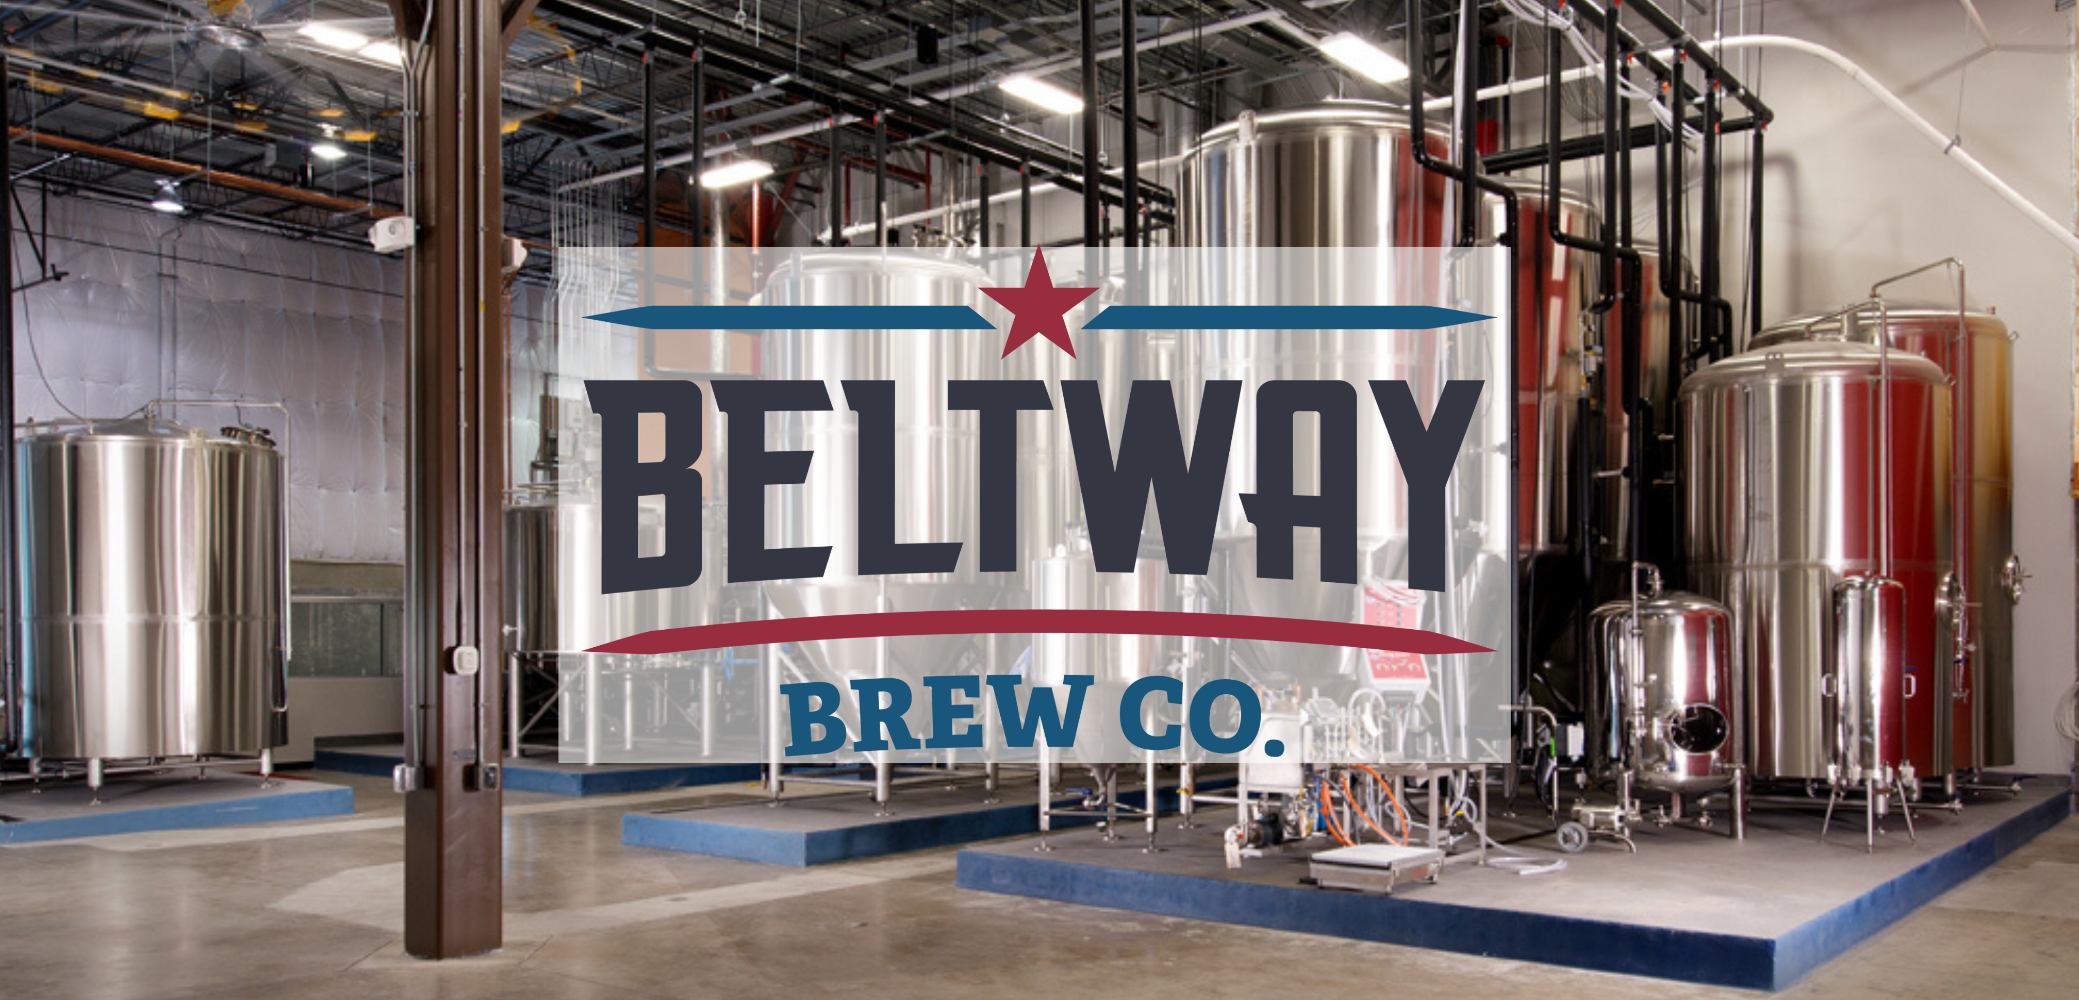 Beltway Brewing: Beautiful All DME 30 BBL Microbrewery - 4-Vessel Brewhouse, HLT, CLT, Fermenters & Brites, Alfa Laval Centrifuge, Pilot System